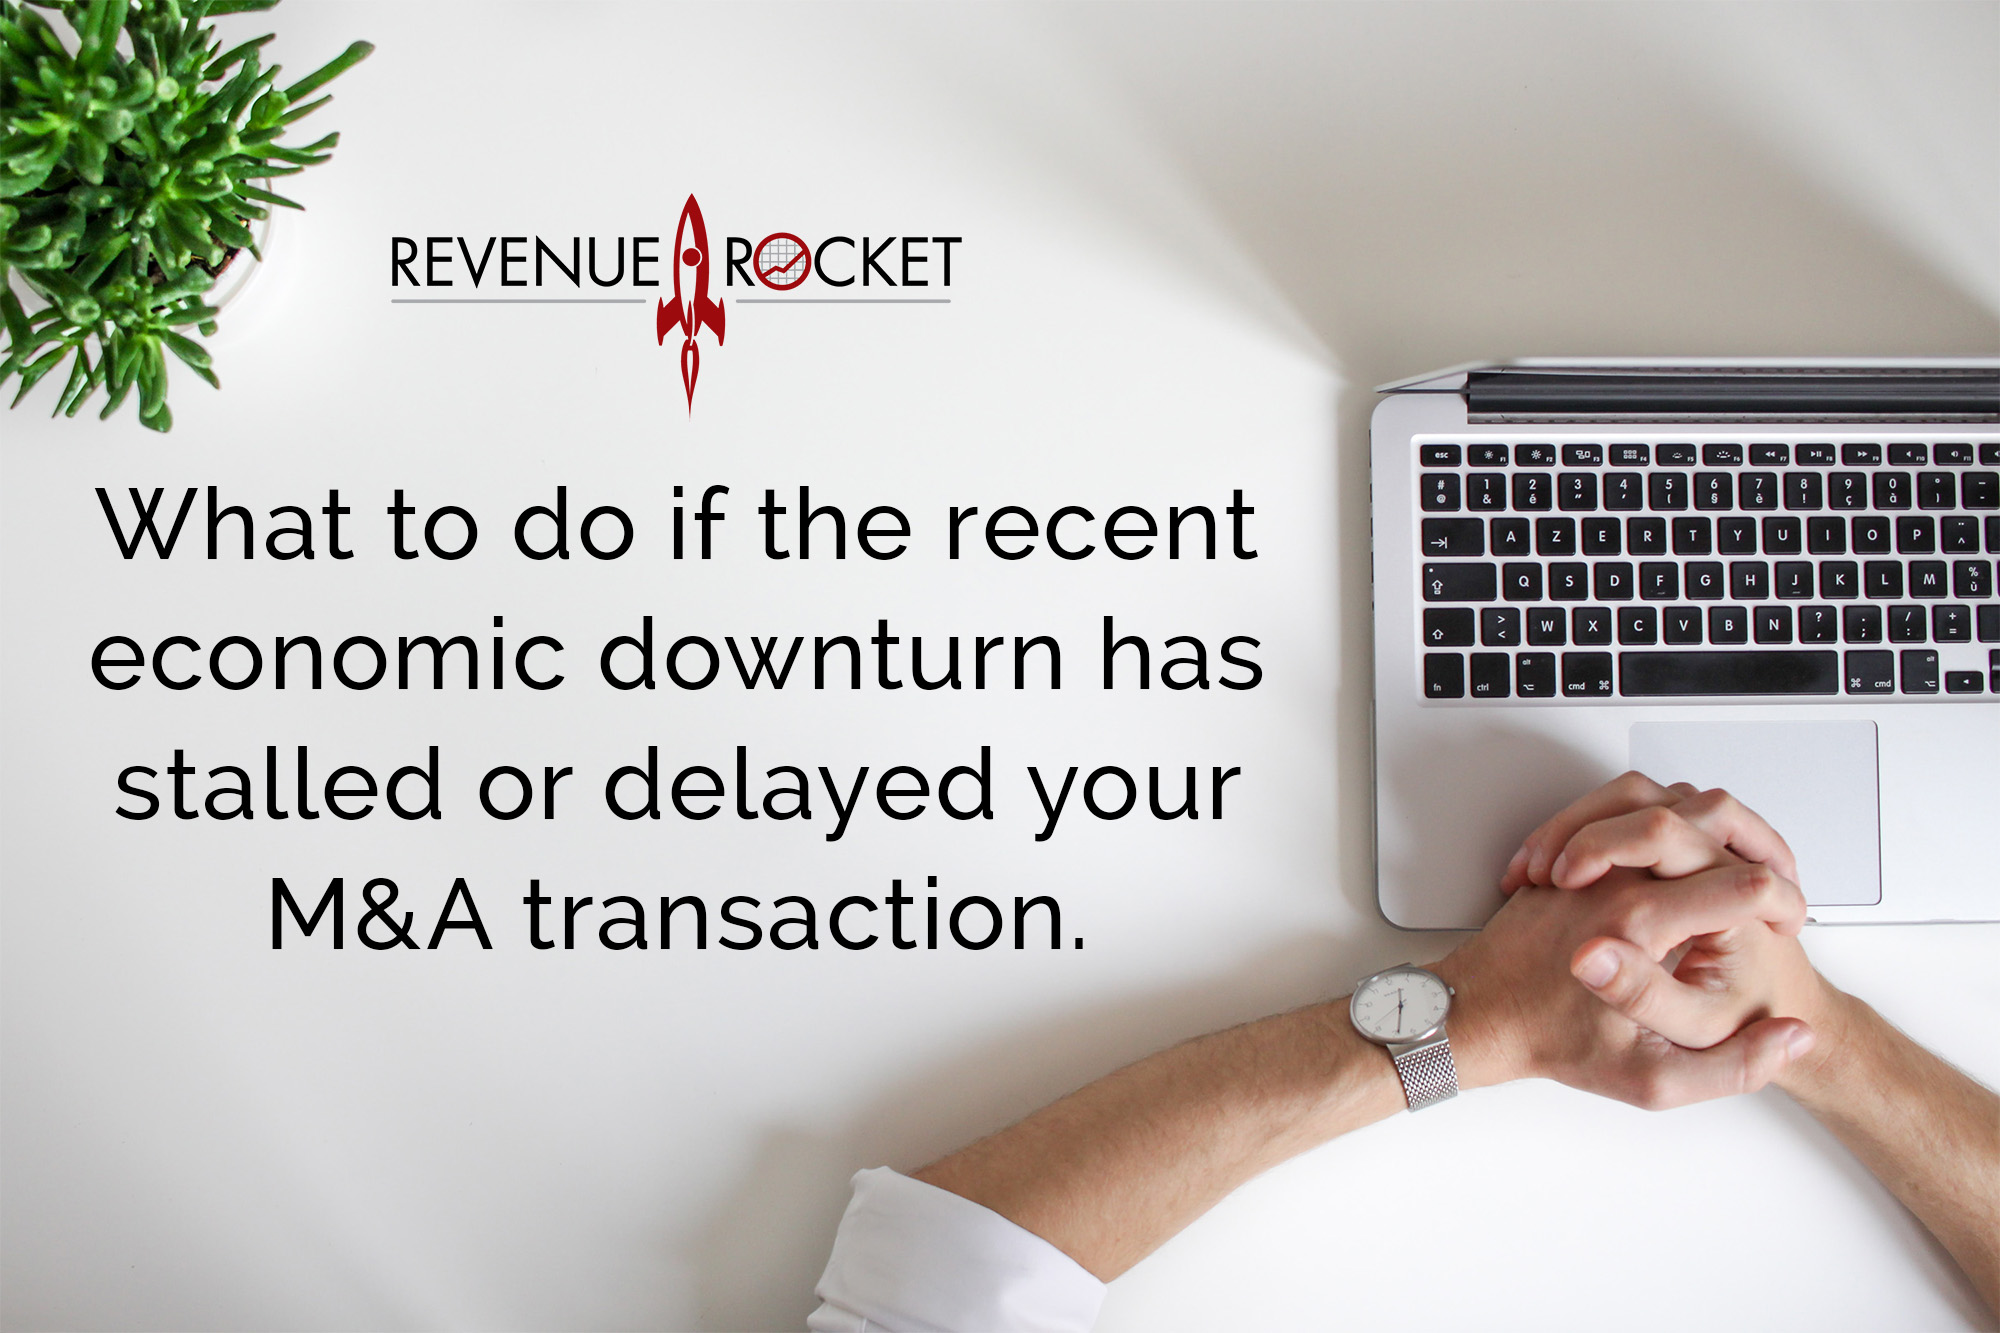 what to do if the recent economic downturn has stalled your M&A transaction